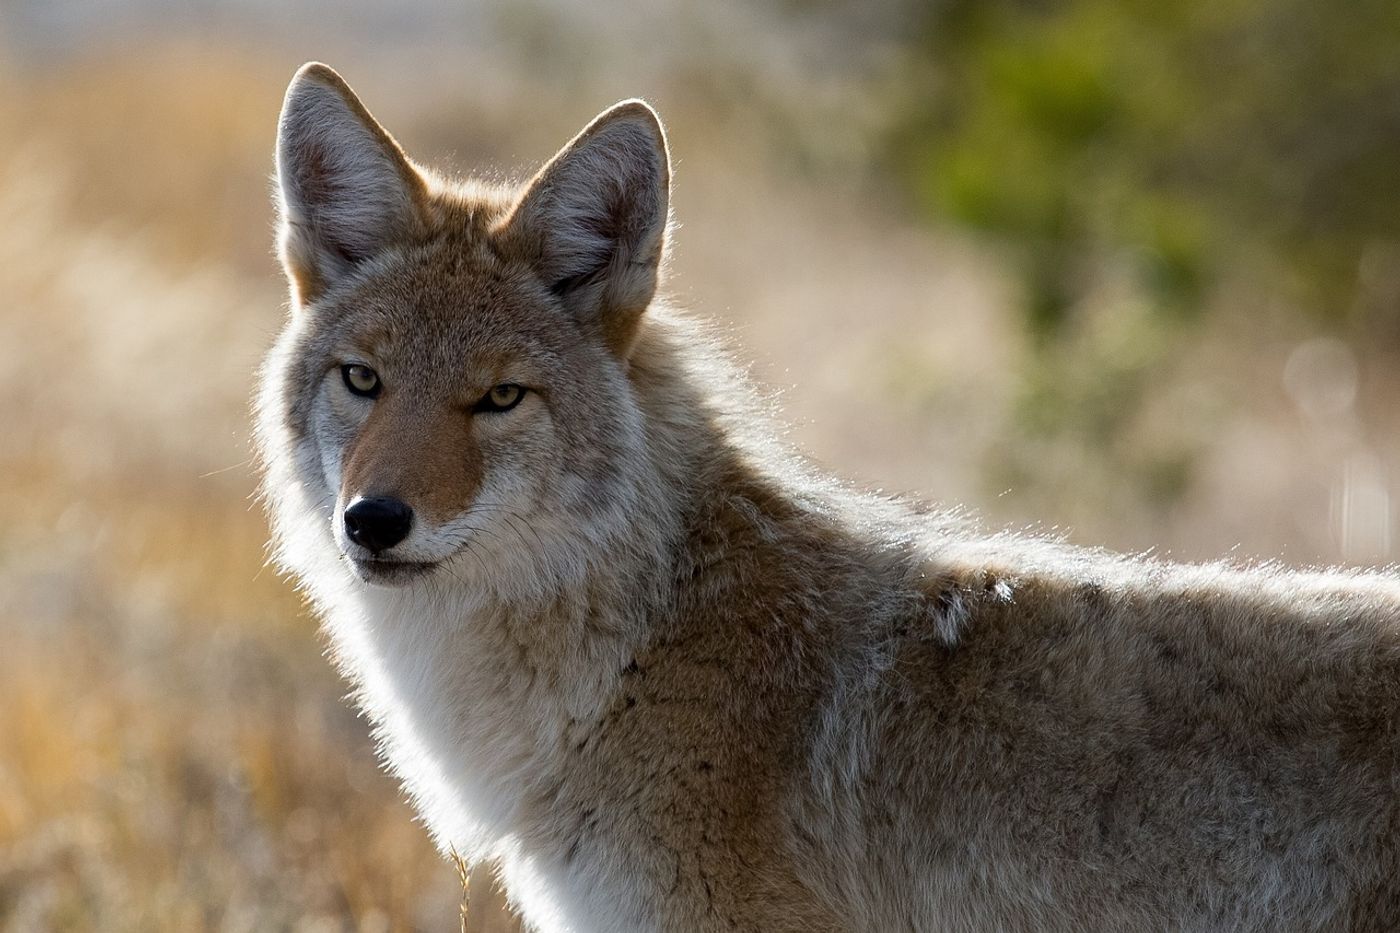 The coyote quickly expanded across the North American continent, and continues to move into South America.